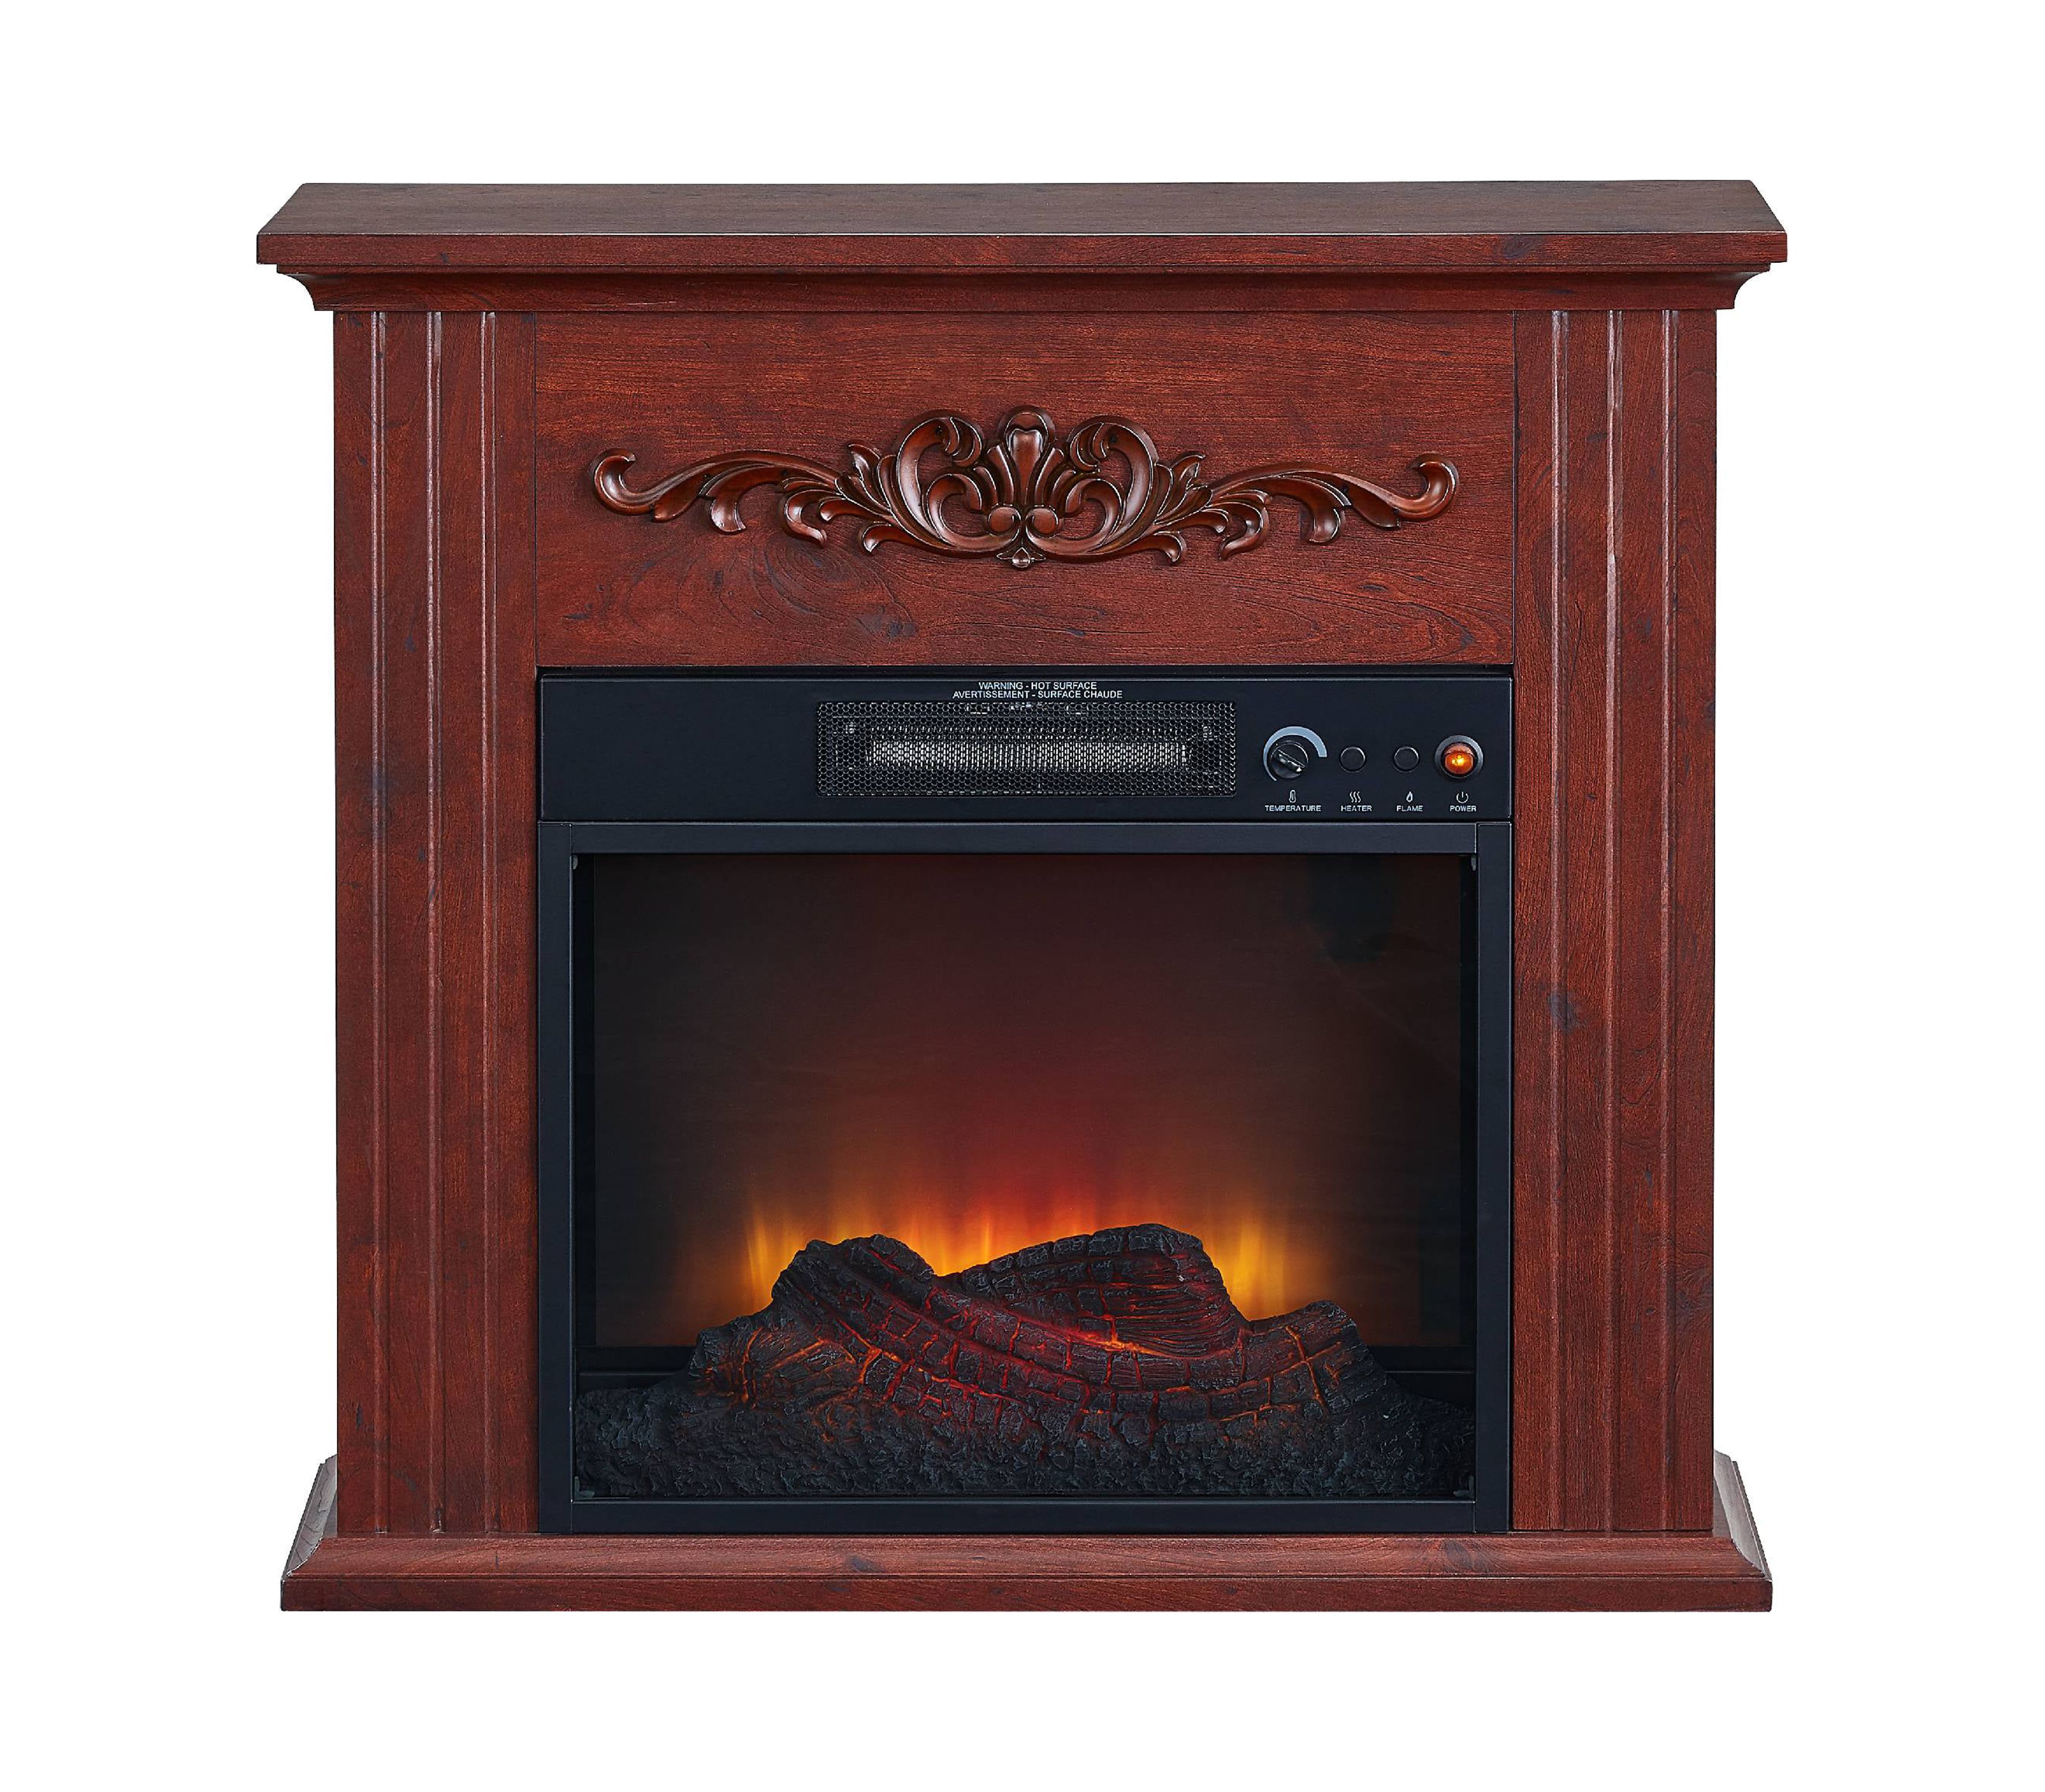 Bold Flame 28 inch Electric Fireplace Heater, Chestnut - image 2 of 5